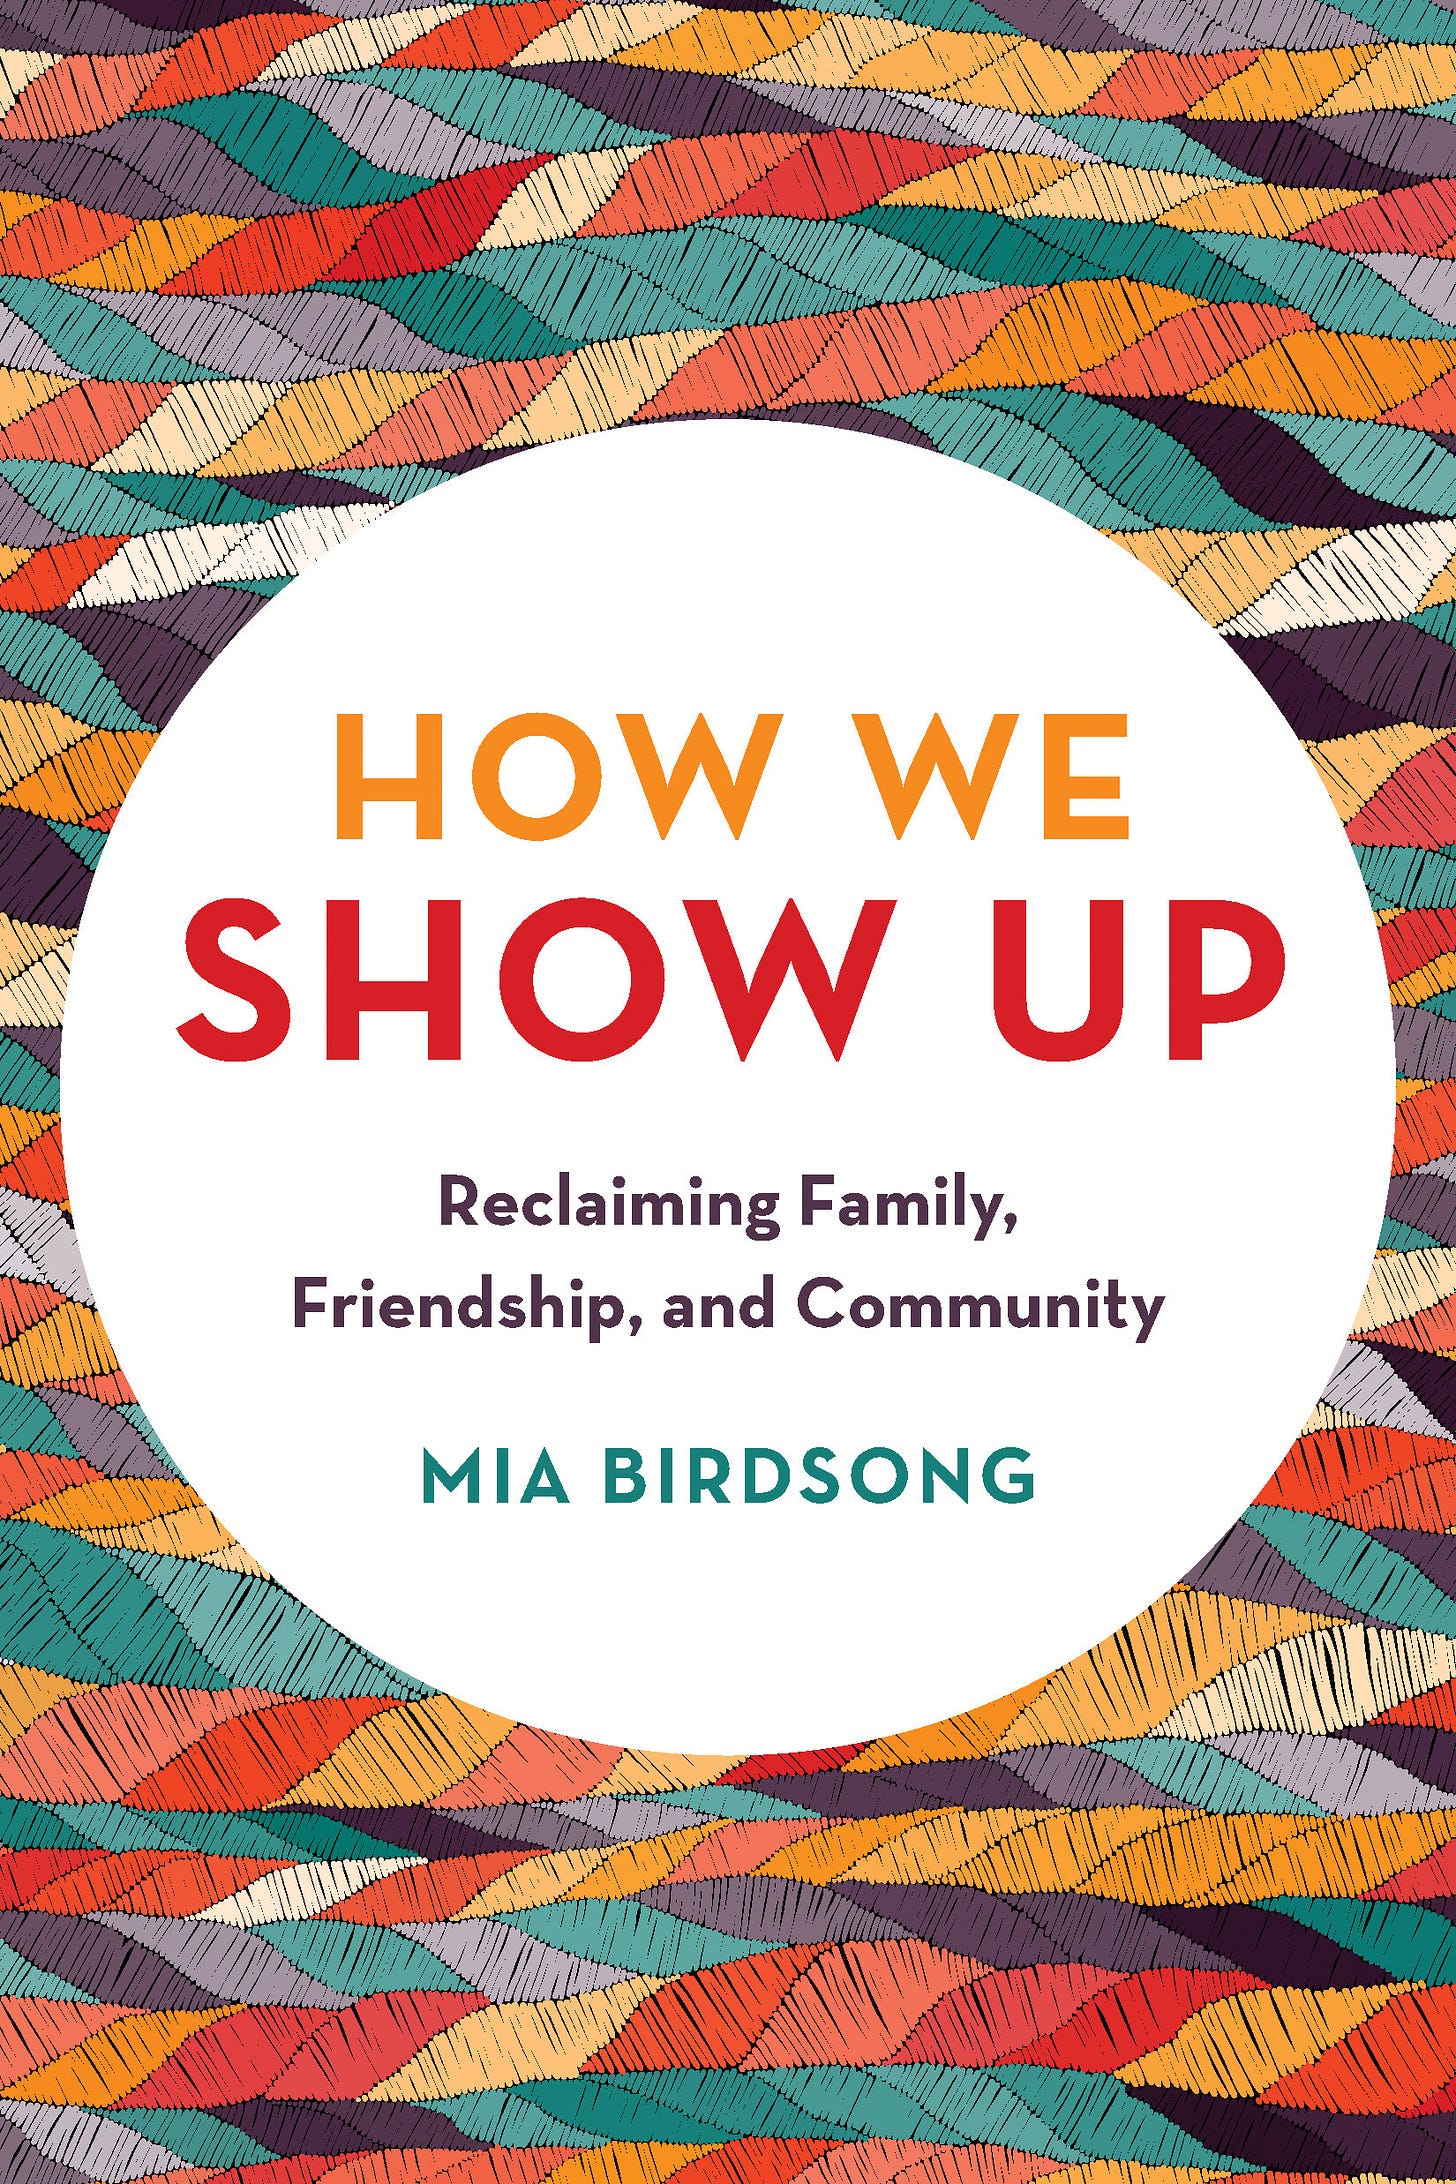 The cover of How We Show Up